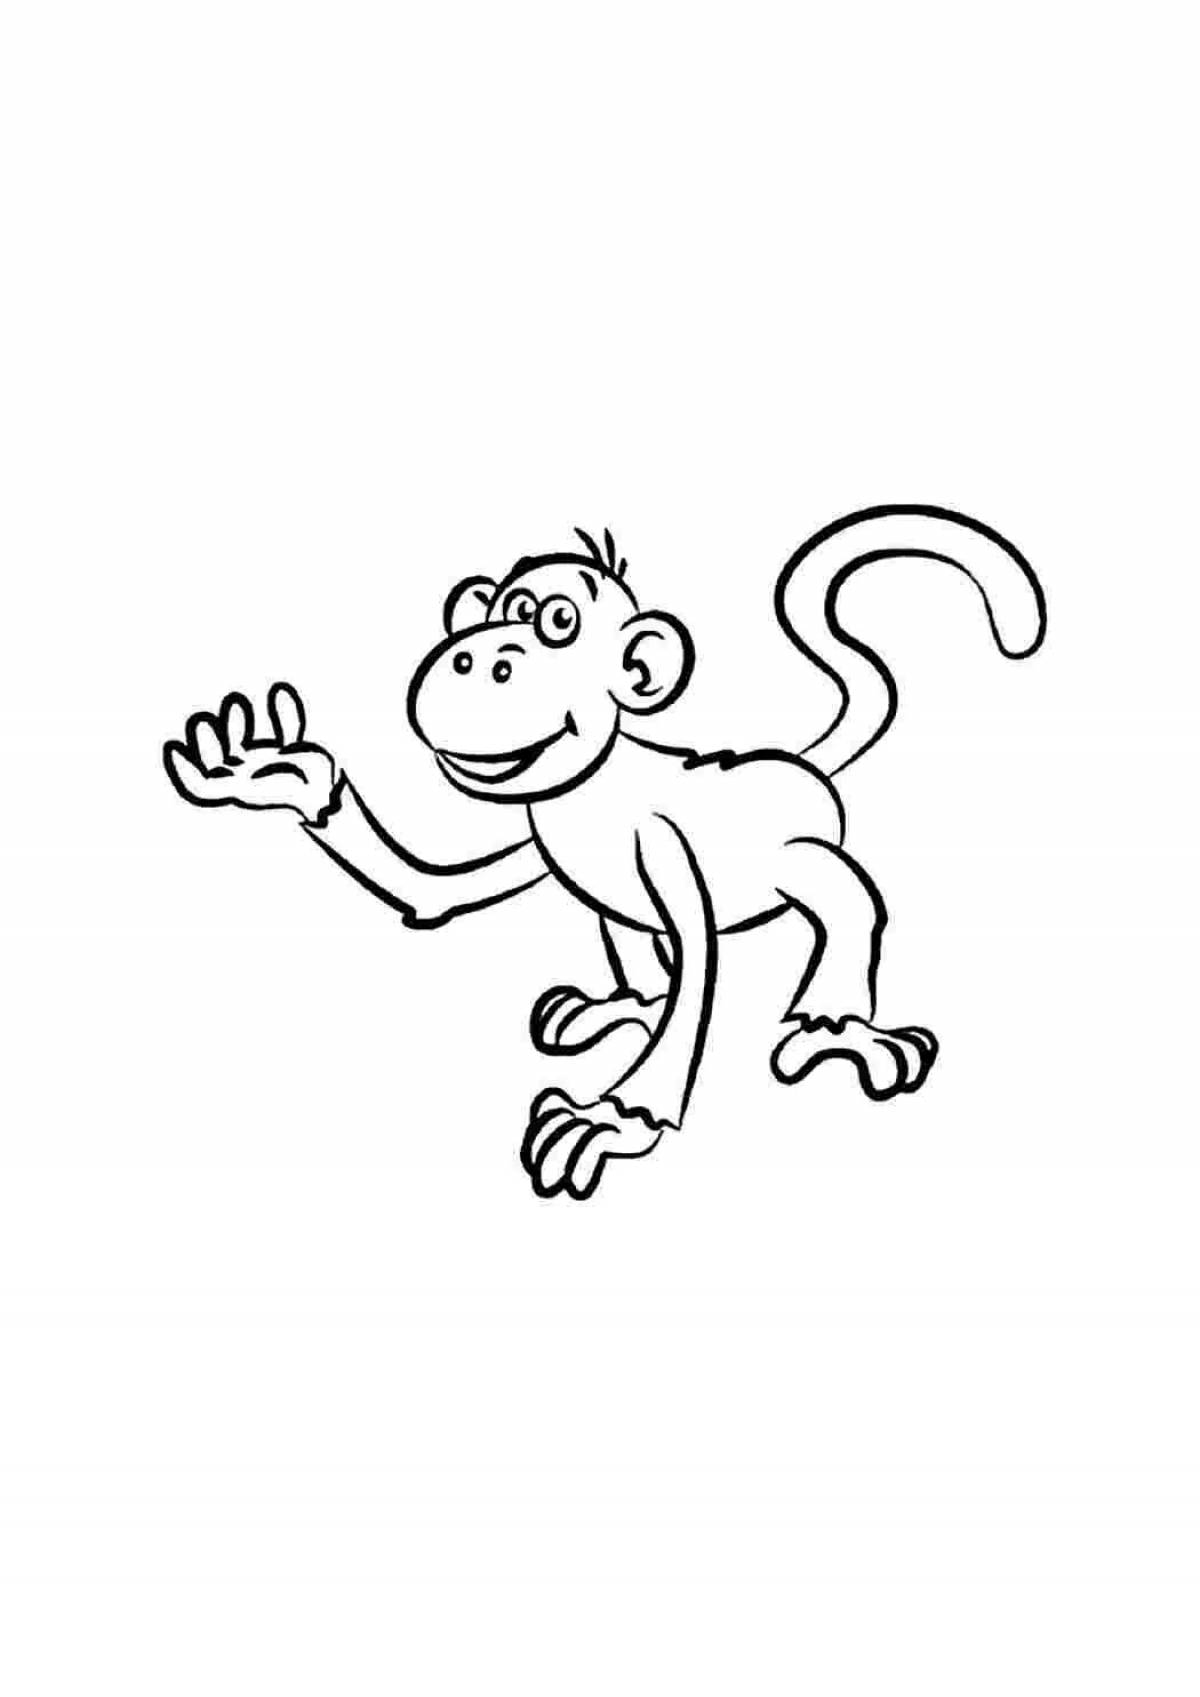 Adorable monkey figurine coloring page